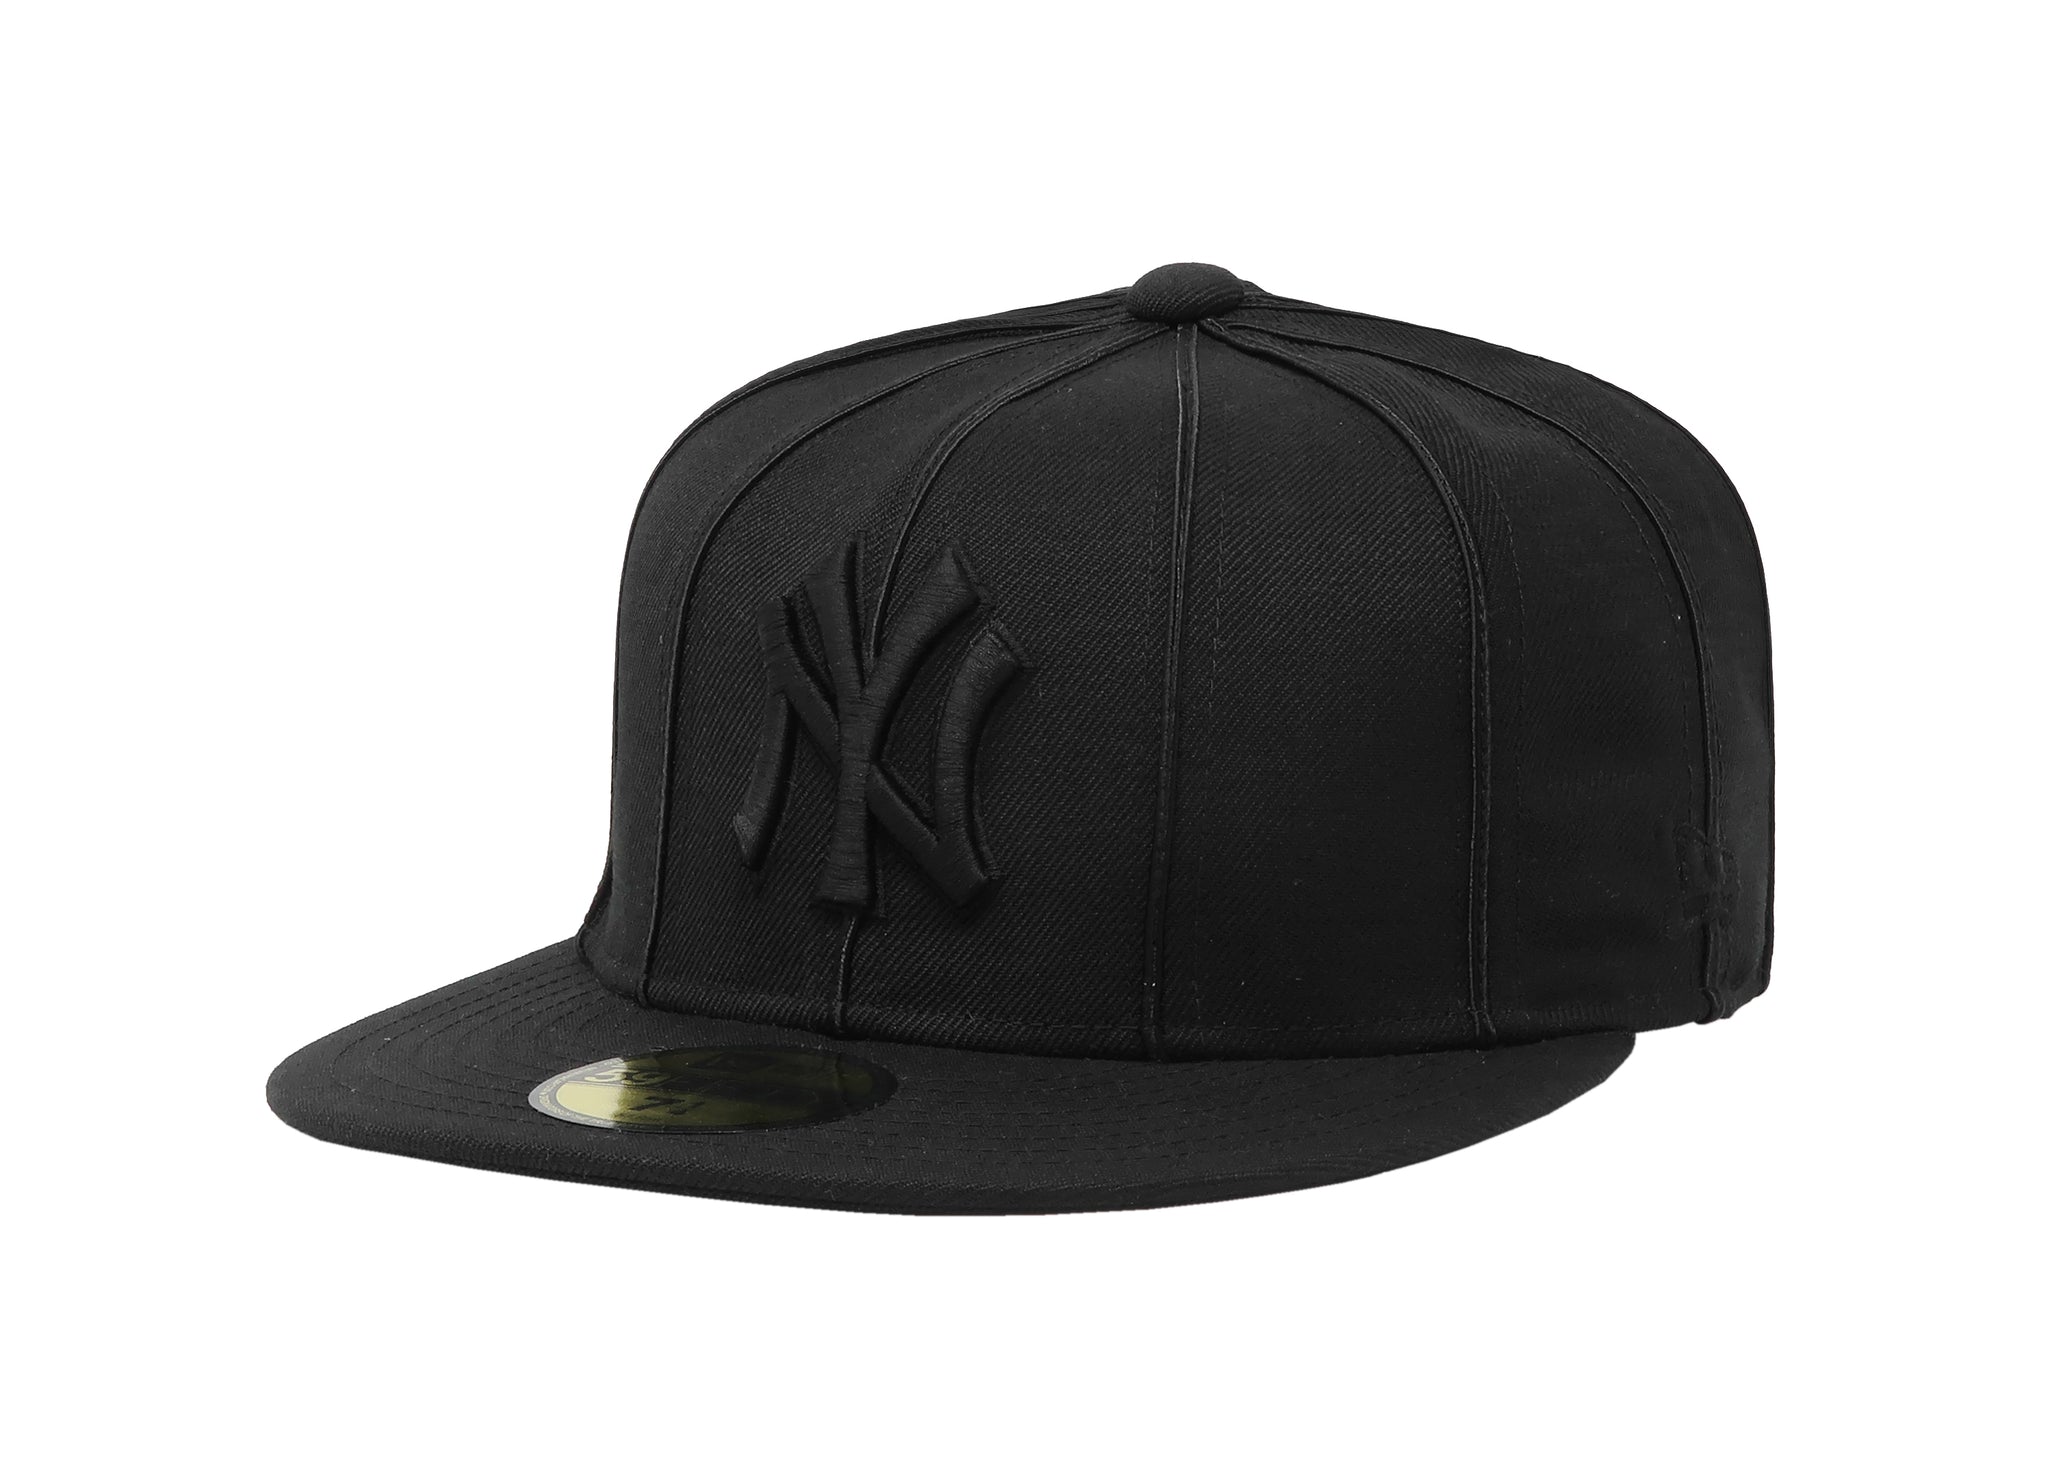 New Era 59Fifty Men's New York Yankees 12Pack Black Fitted Cap